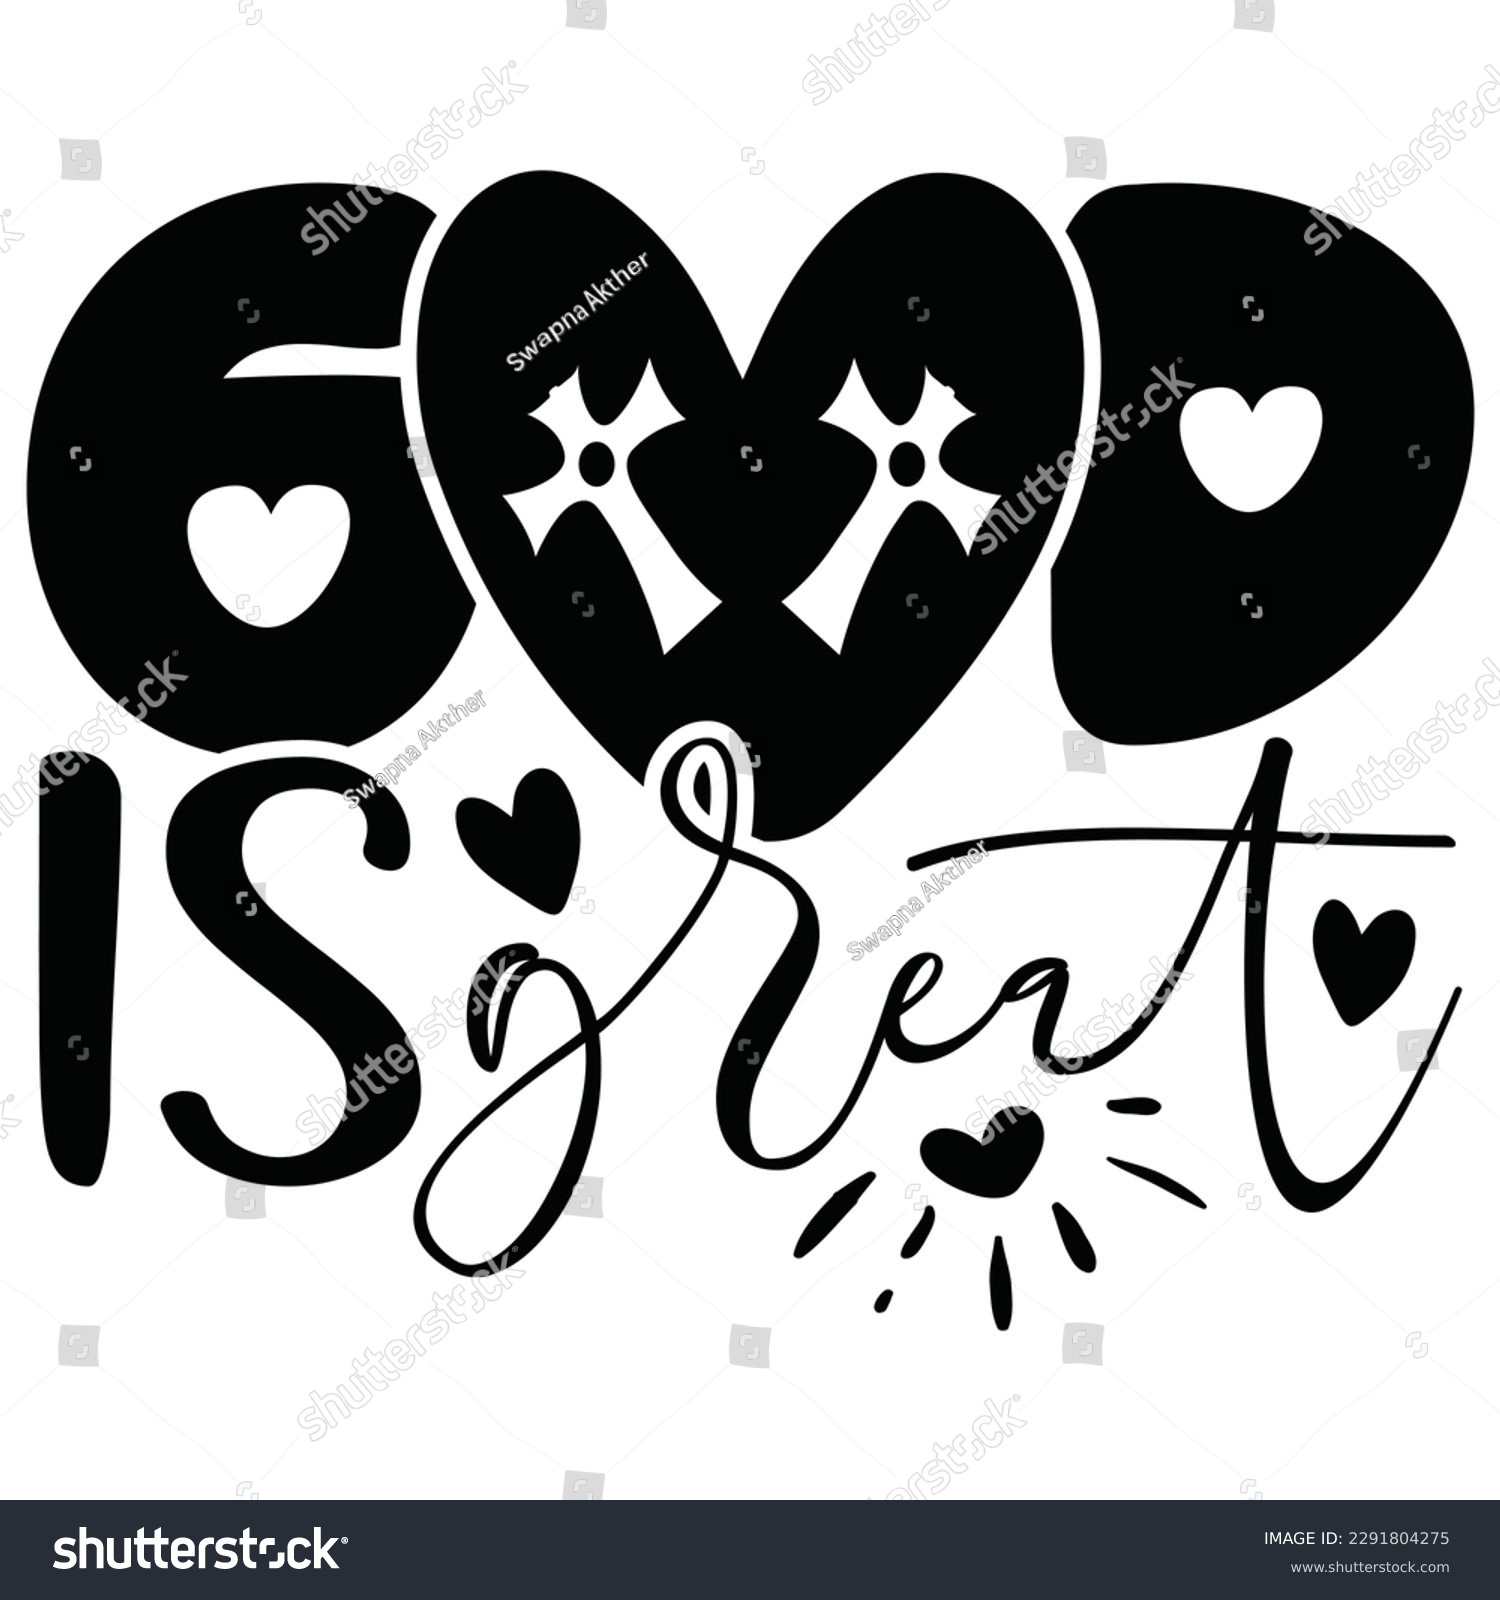 SVG of God Is Great - Jesus Christian SVG And T-shirt Design, Jesus Christian SVG Quotes Design t shirt, Vector EPS Editable Files, can you download this Design. svg